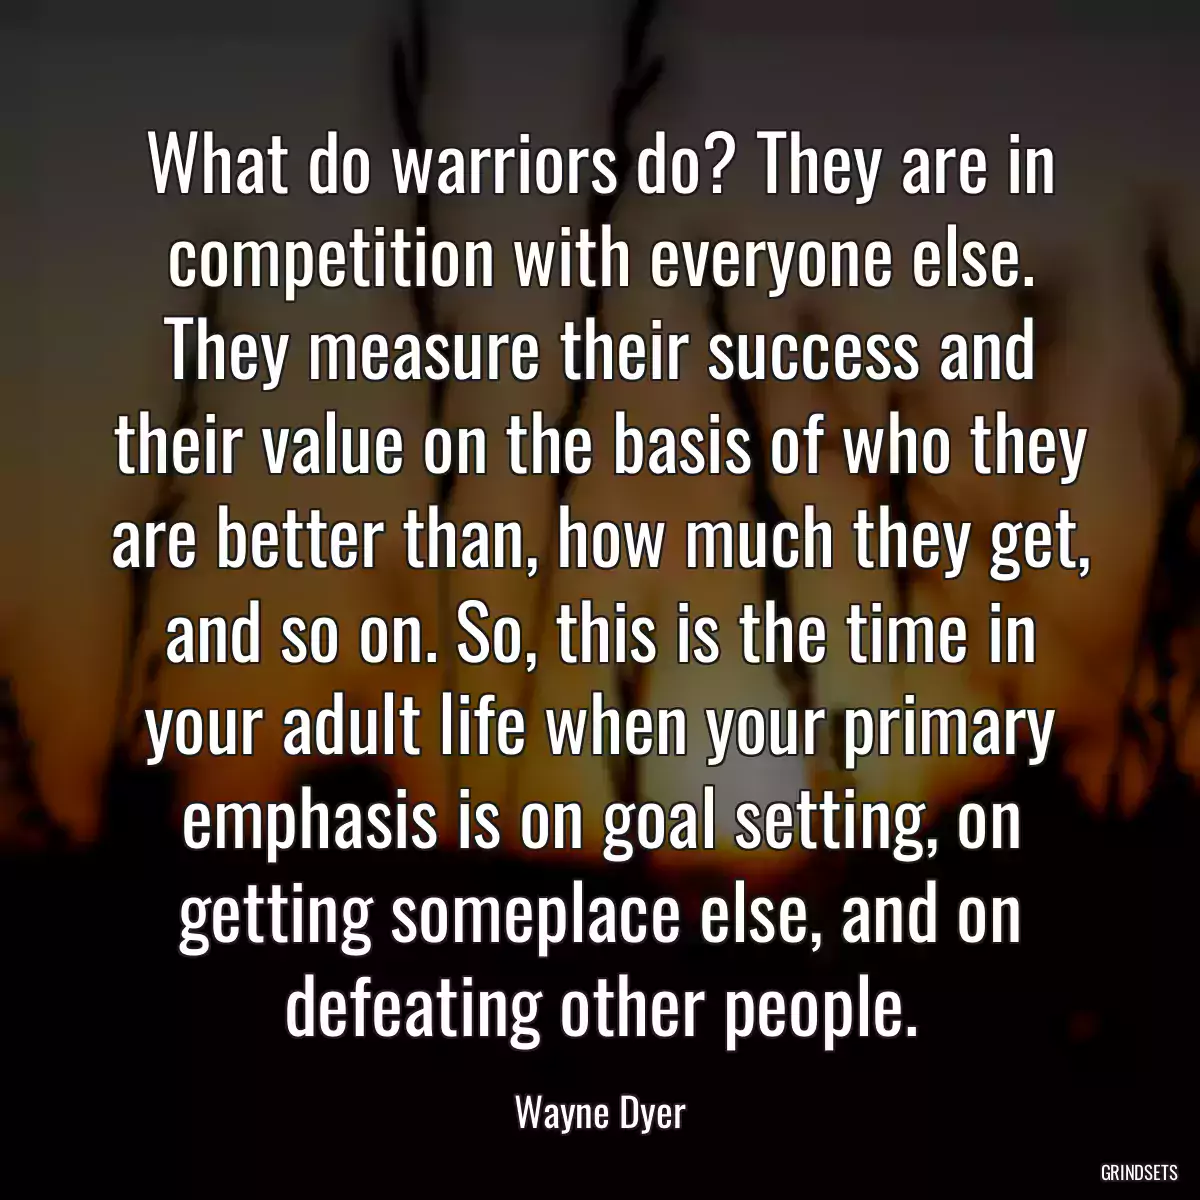 What do warriors do? They are in competition with everyone else. They measure their success and their value on the basis of who they are better than, how much they get, and so on. So, this is the time in your adult life when your primary emphasis is on goal setting, on getting someplace else, and on defeating other people.